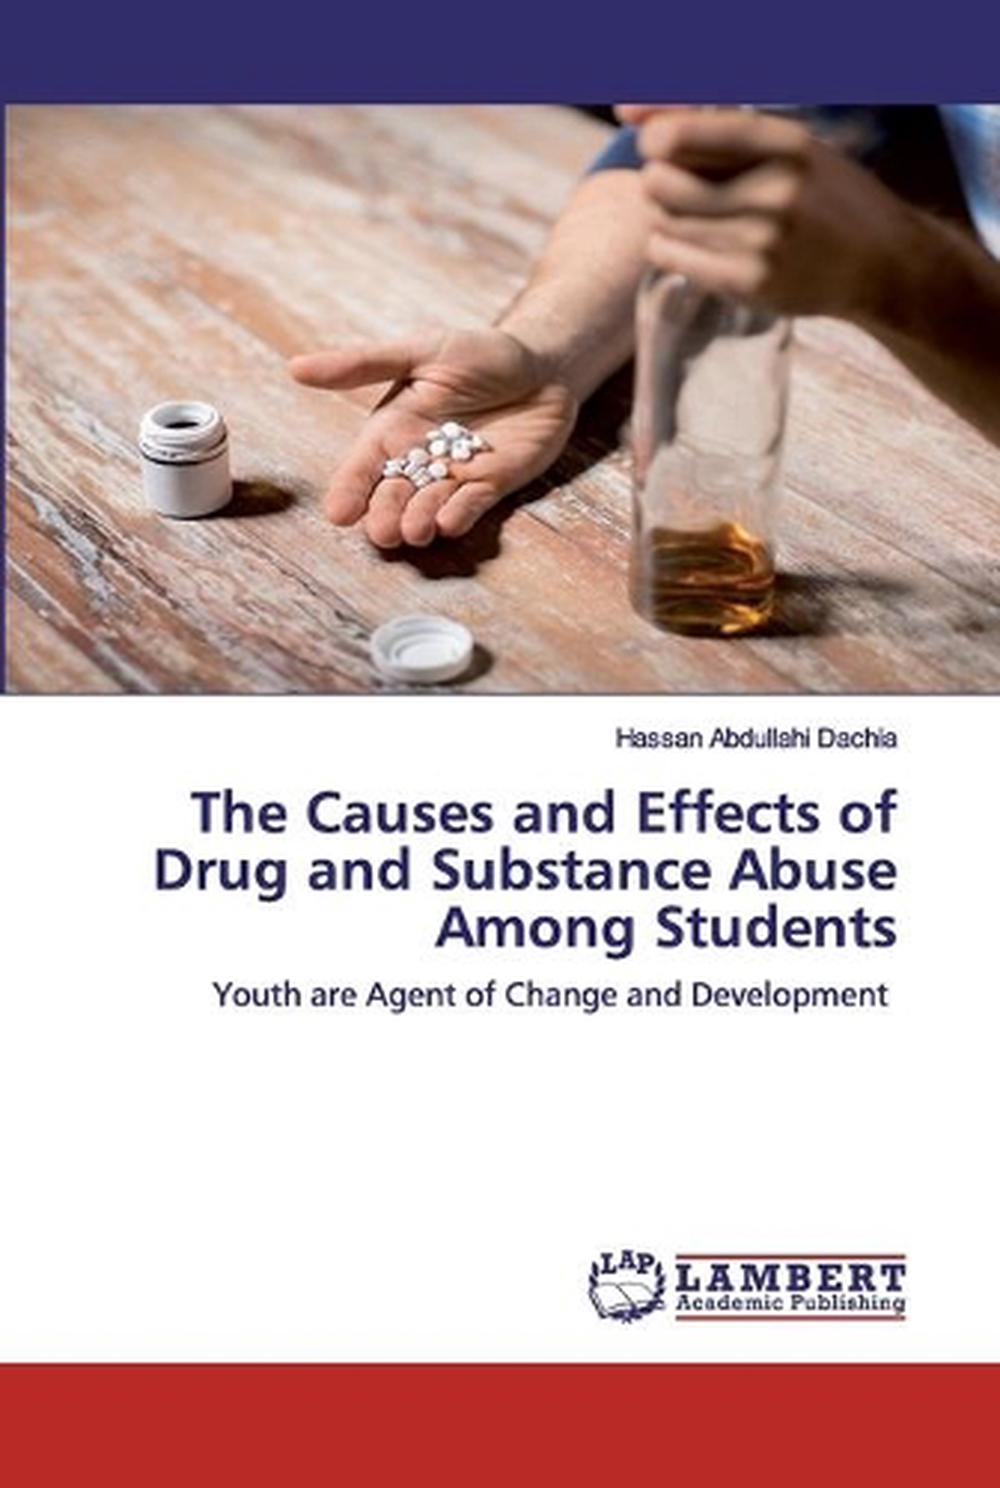 expository essay on causes of drug abuse